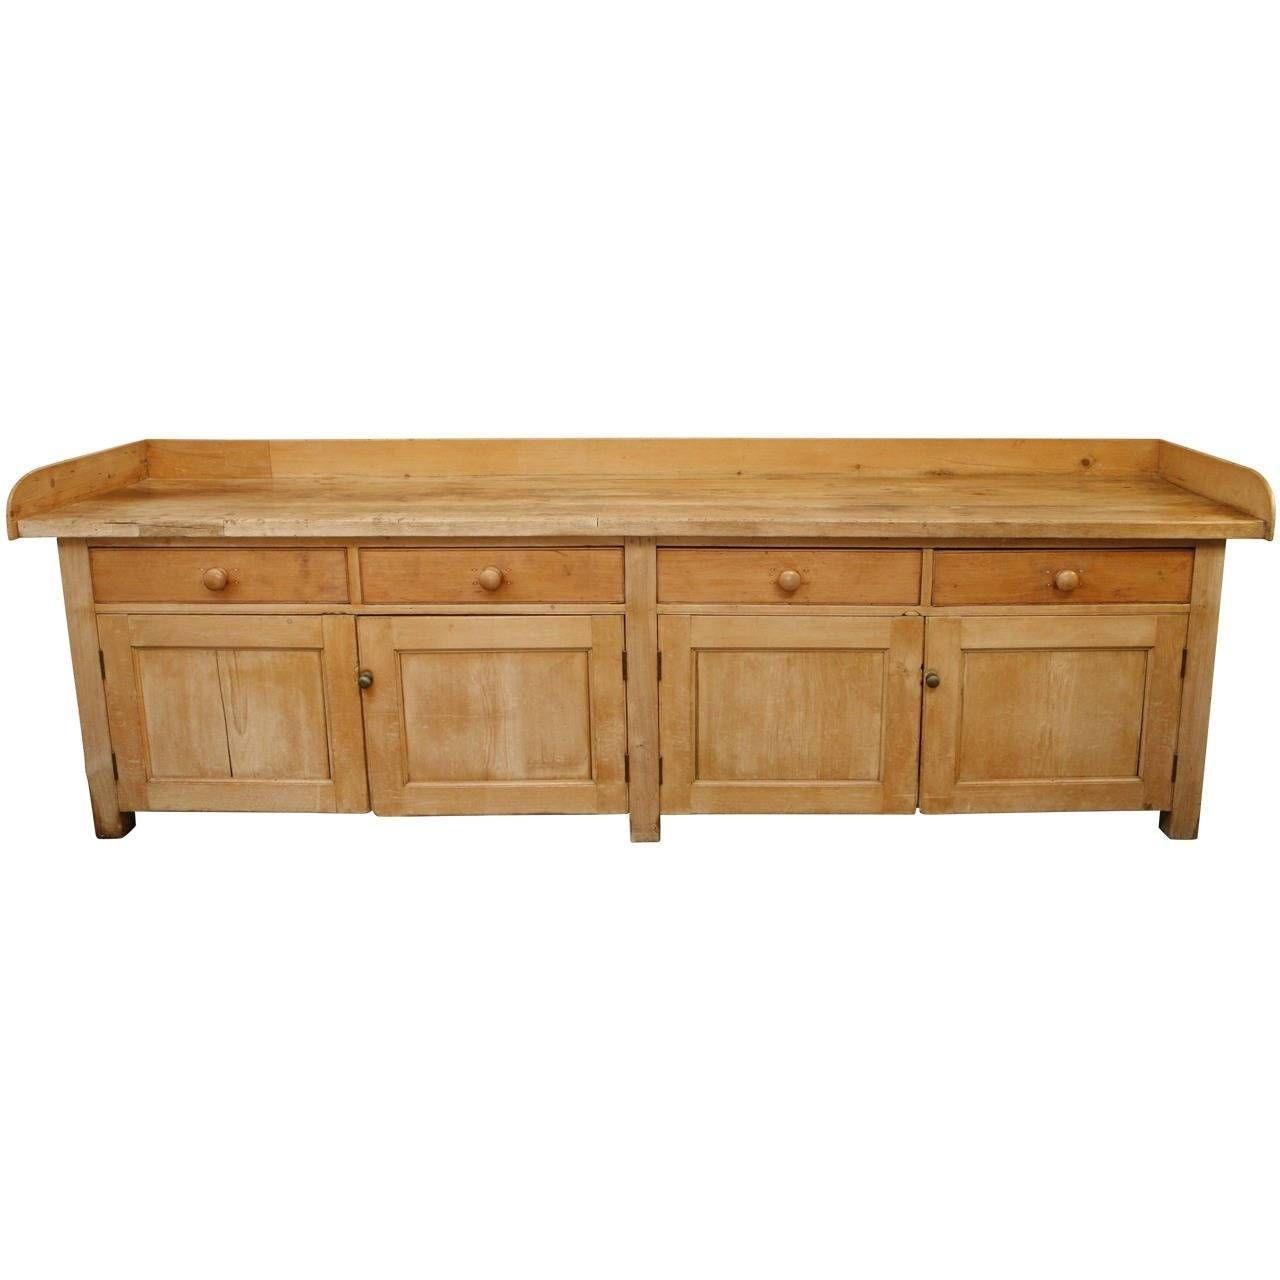 18th Century Large Pine Sideboard Or Buffet For Sale At 1stdibs With Sideboard Sale (View 3 of 20)